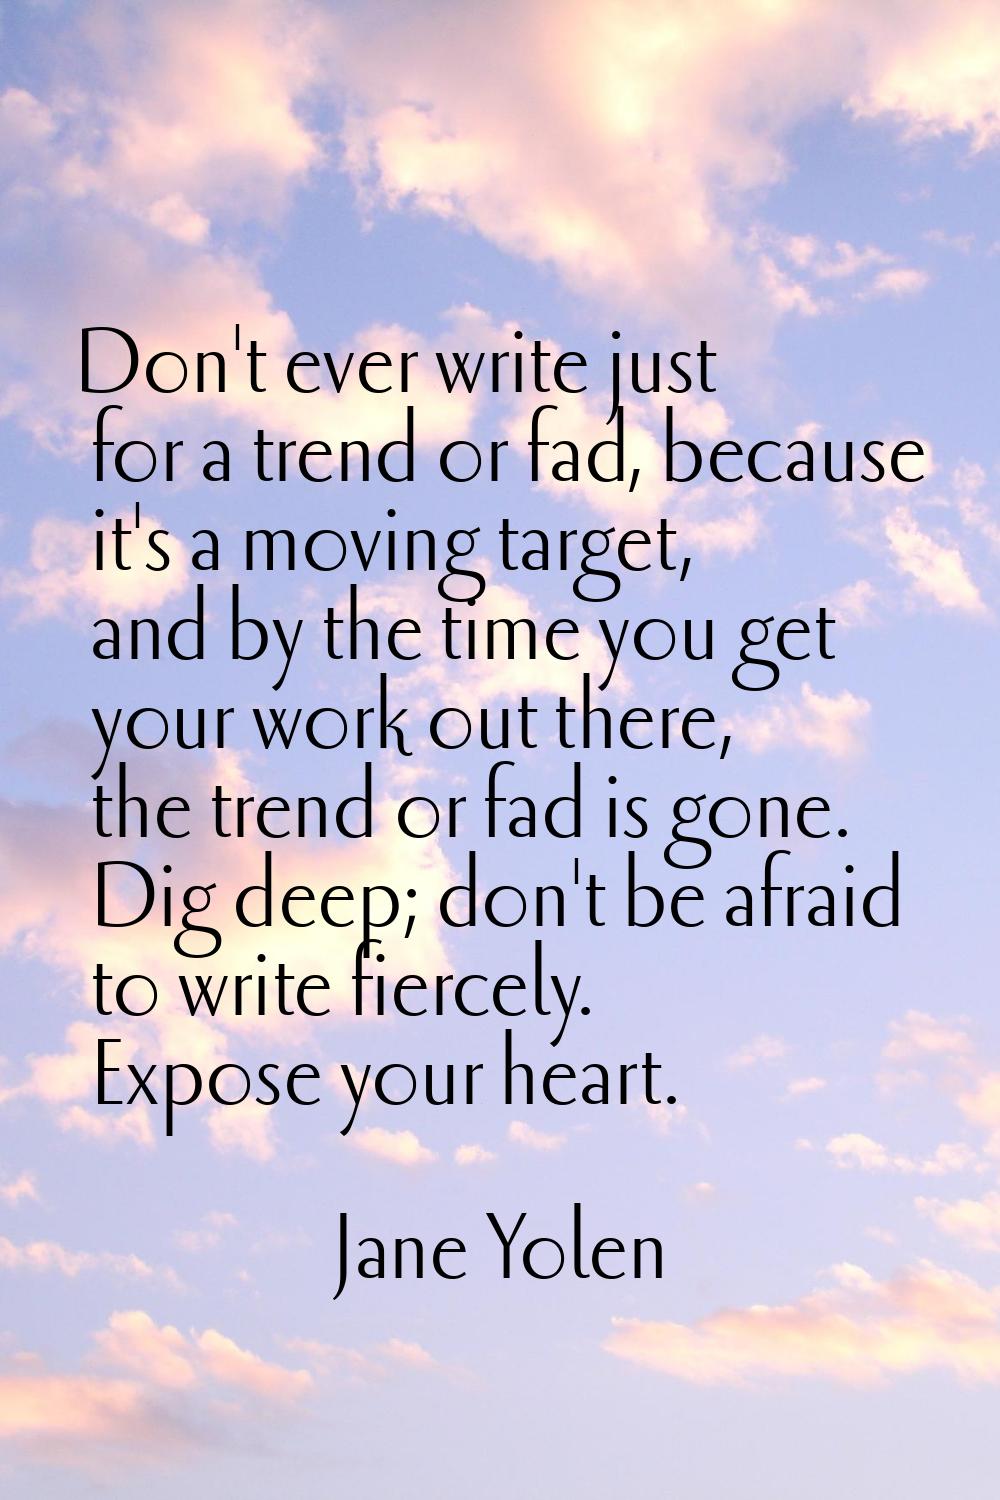 Don't ever write just for a trend or fad, because it's a moving target, and by the time you get you